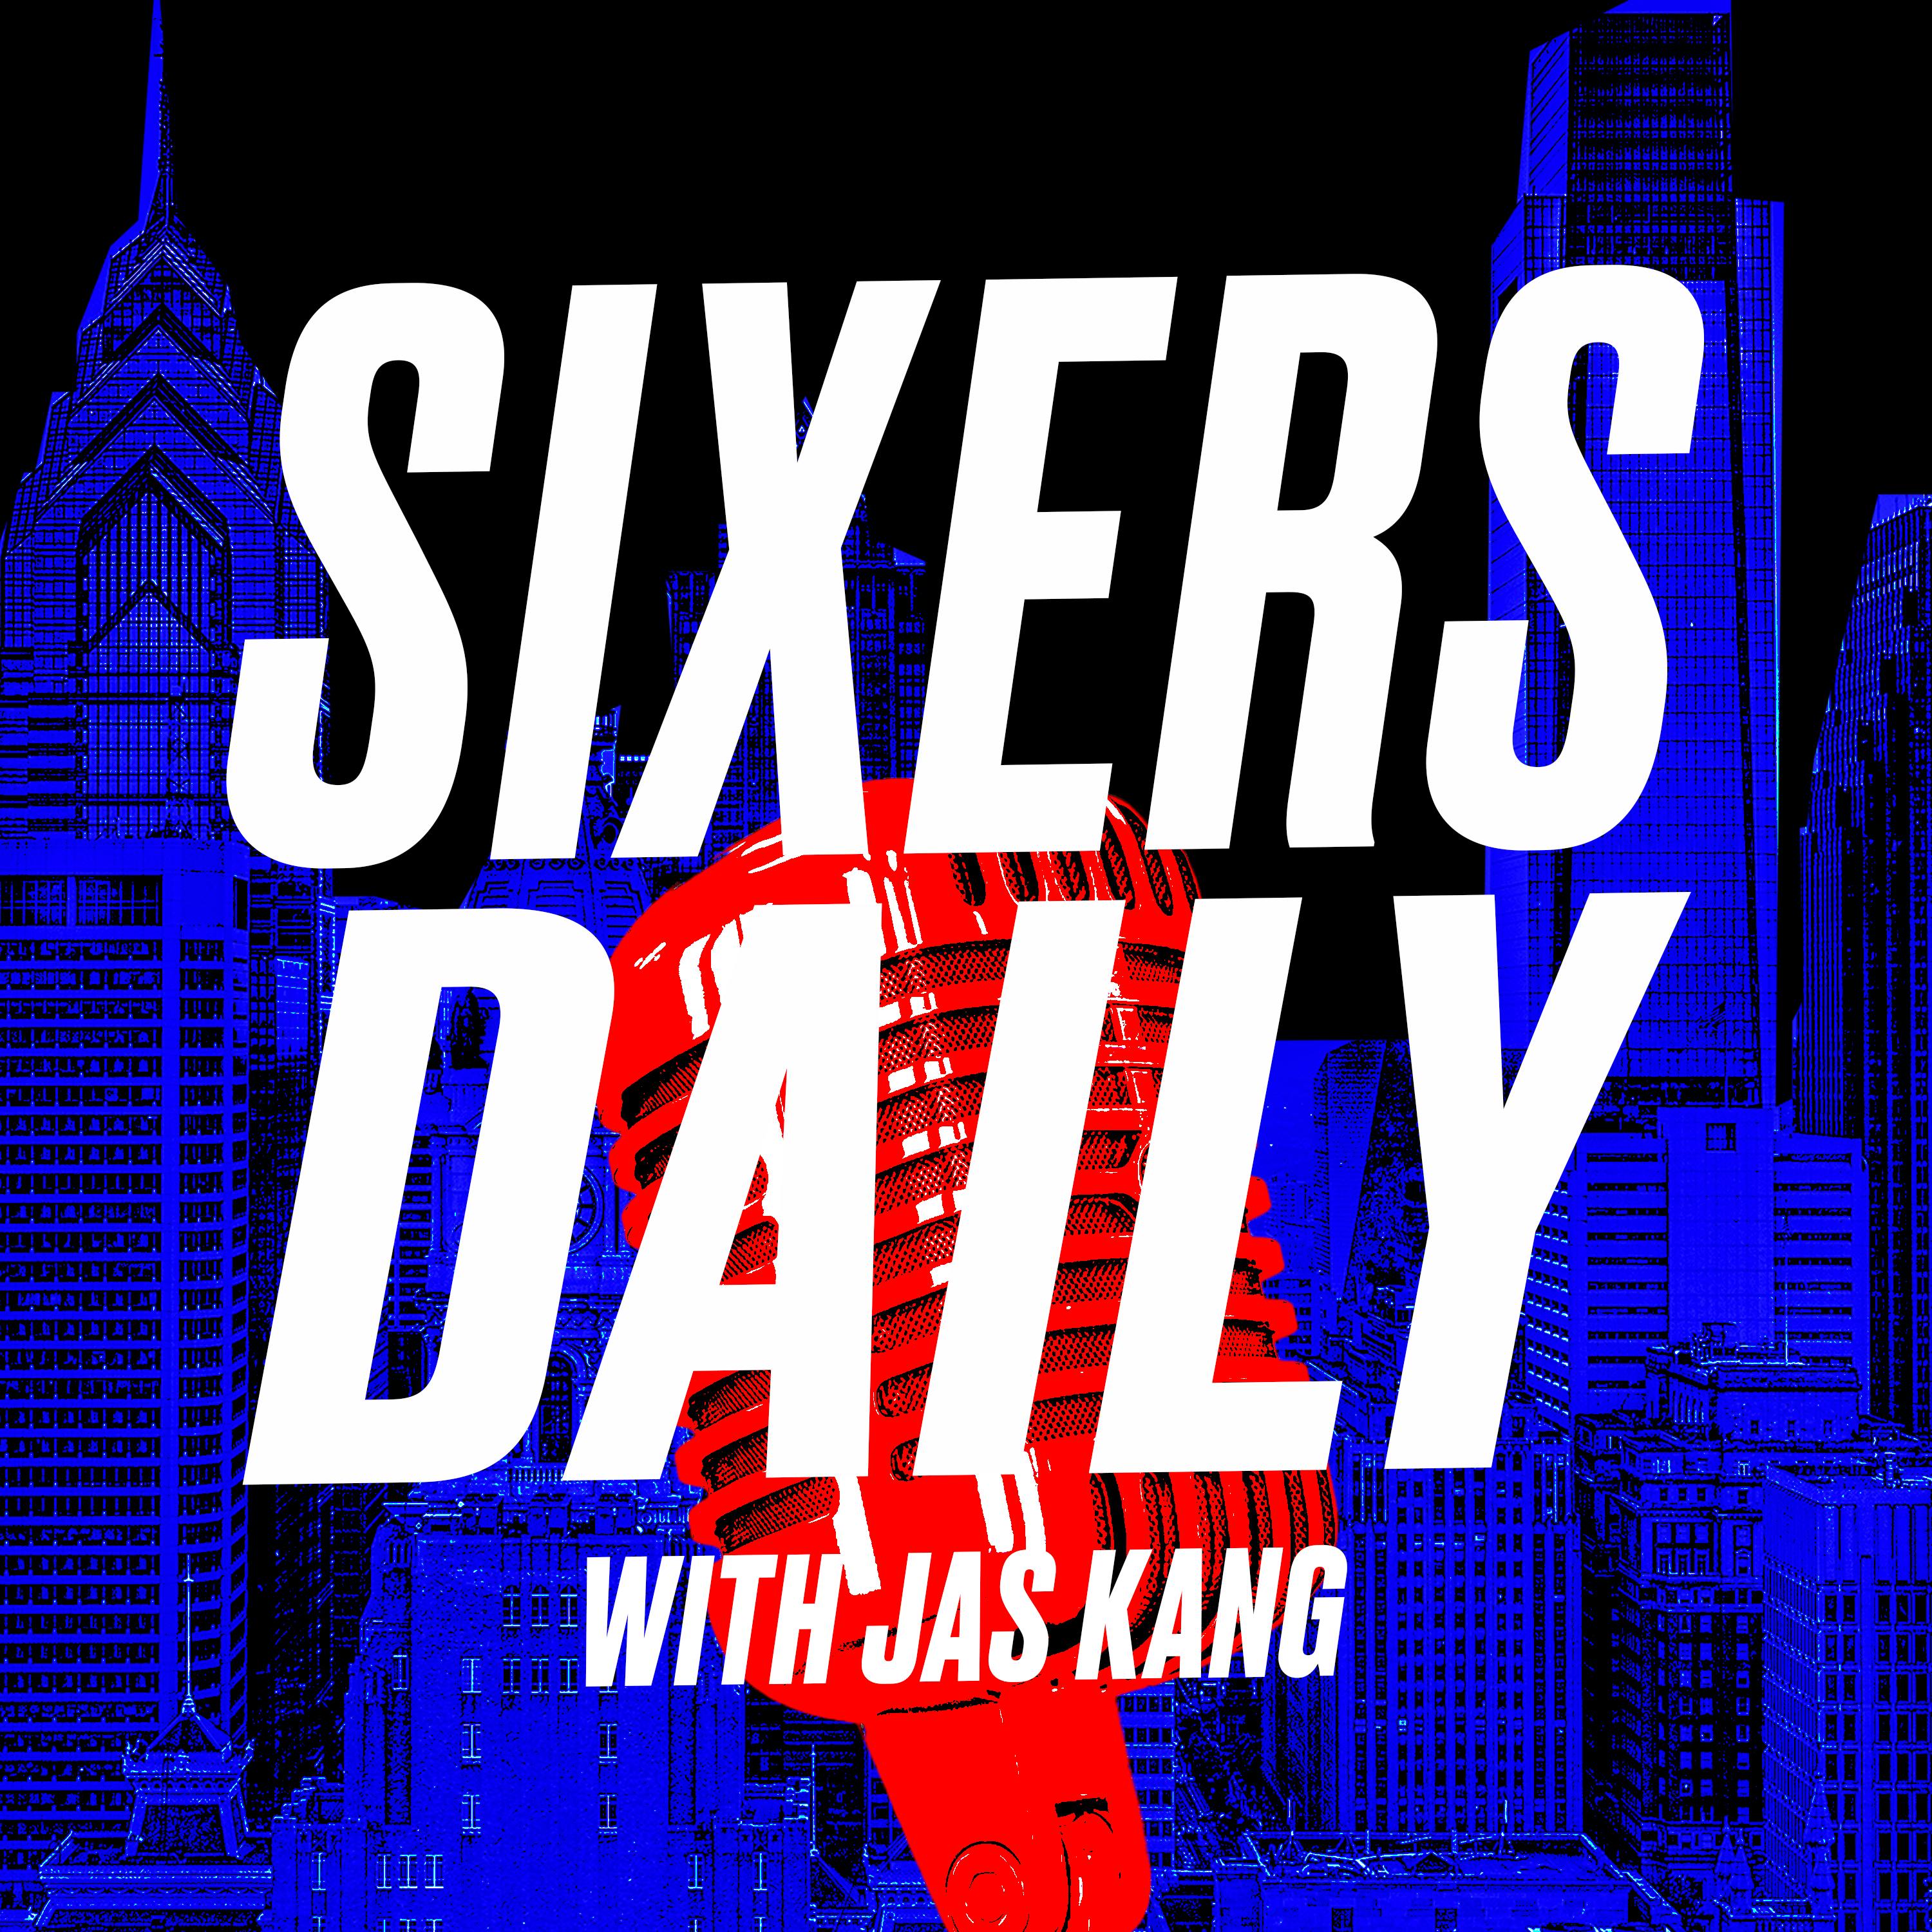 Sixers Daily with Jas Kang - Bryan Toporek on James Harden signing and the new arena in Philly. Plus, SB Nation's Joe Flynn on the Donovan Mitchell to the Knicks saga.